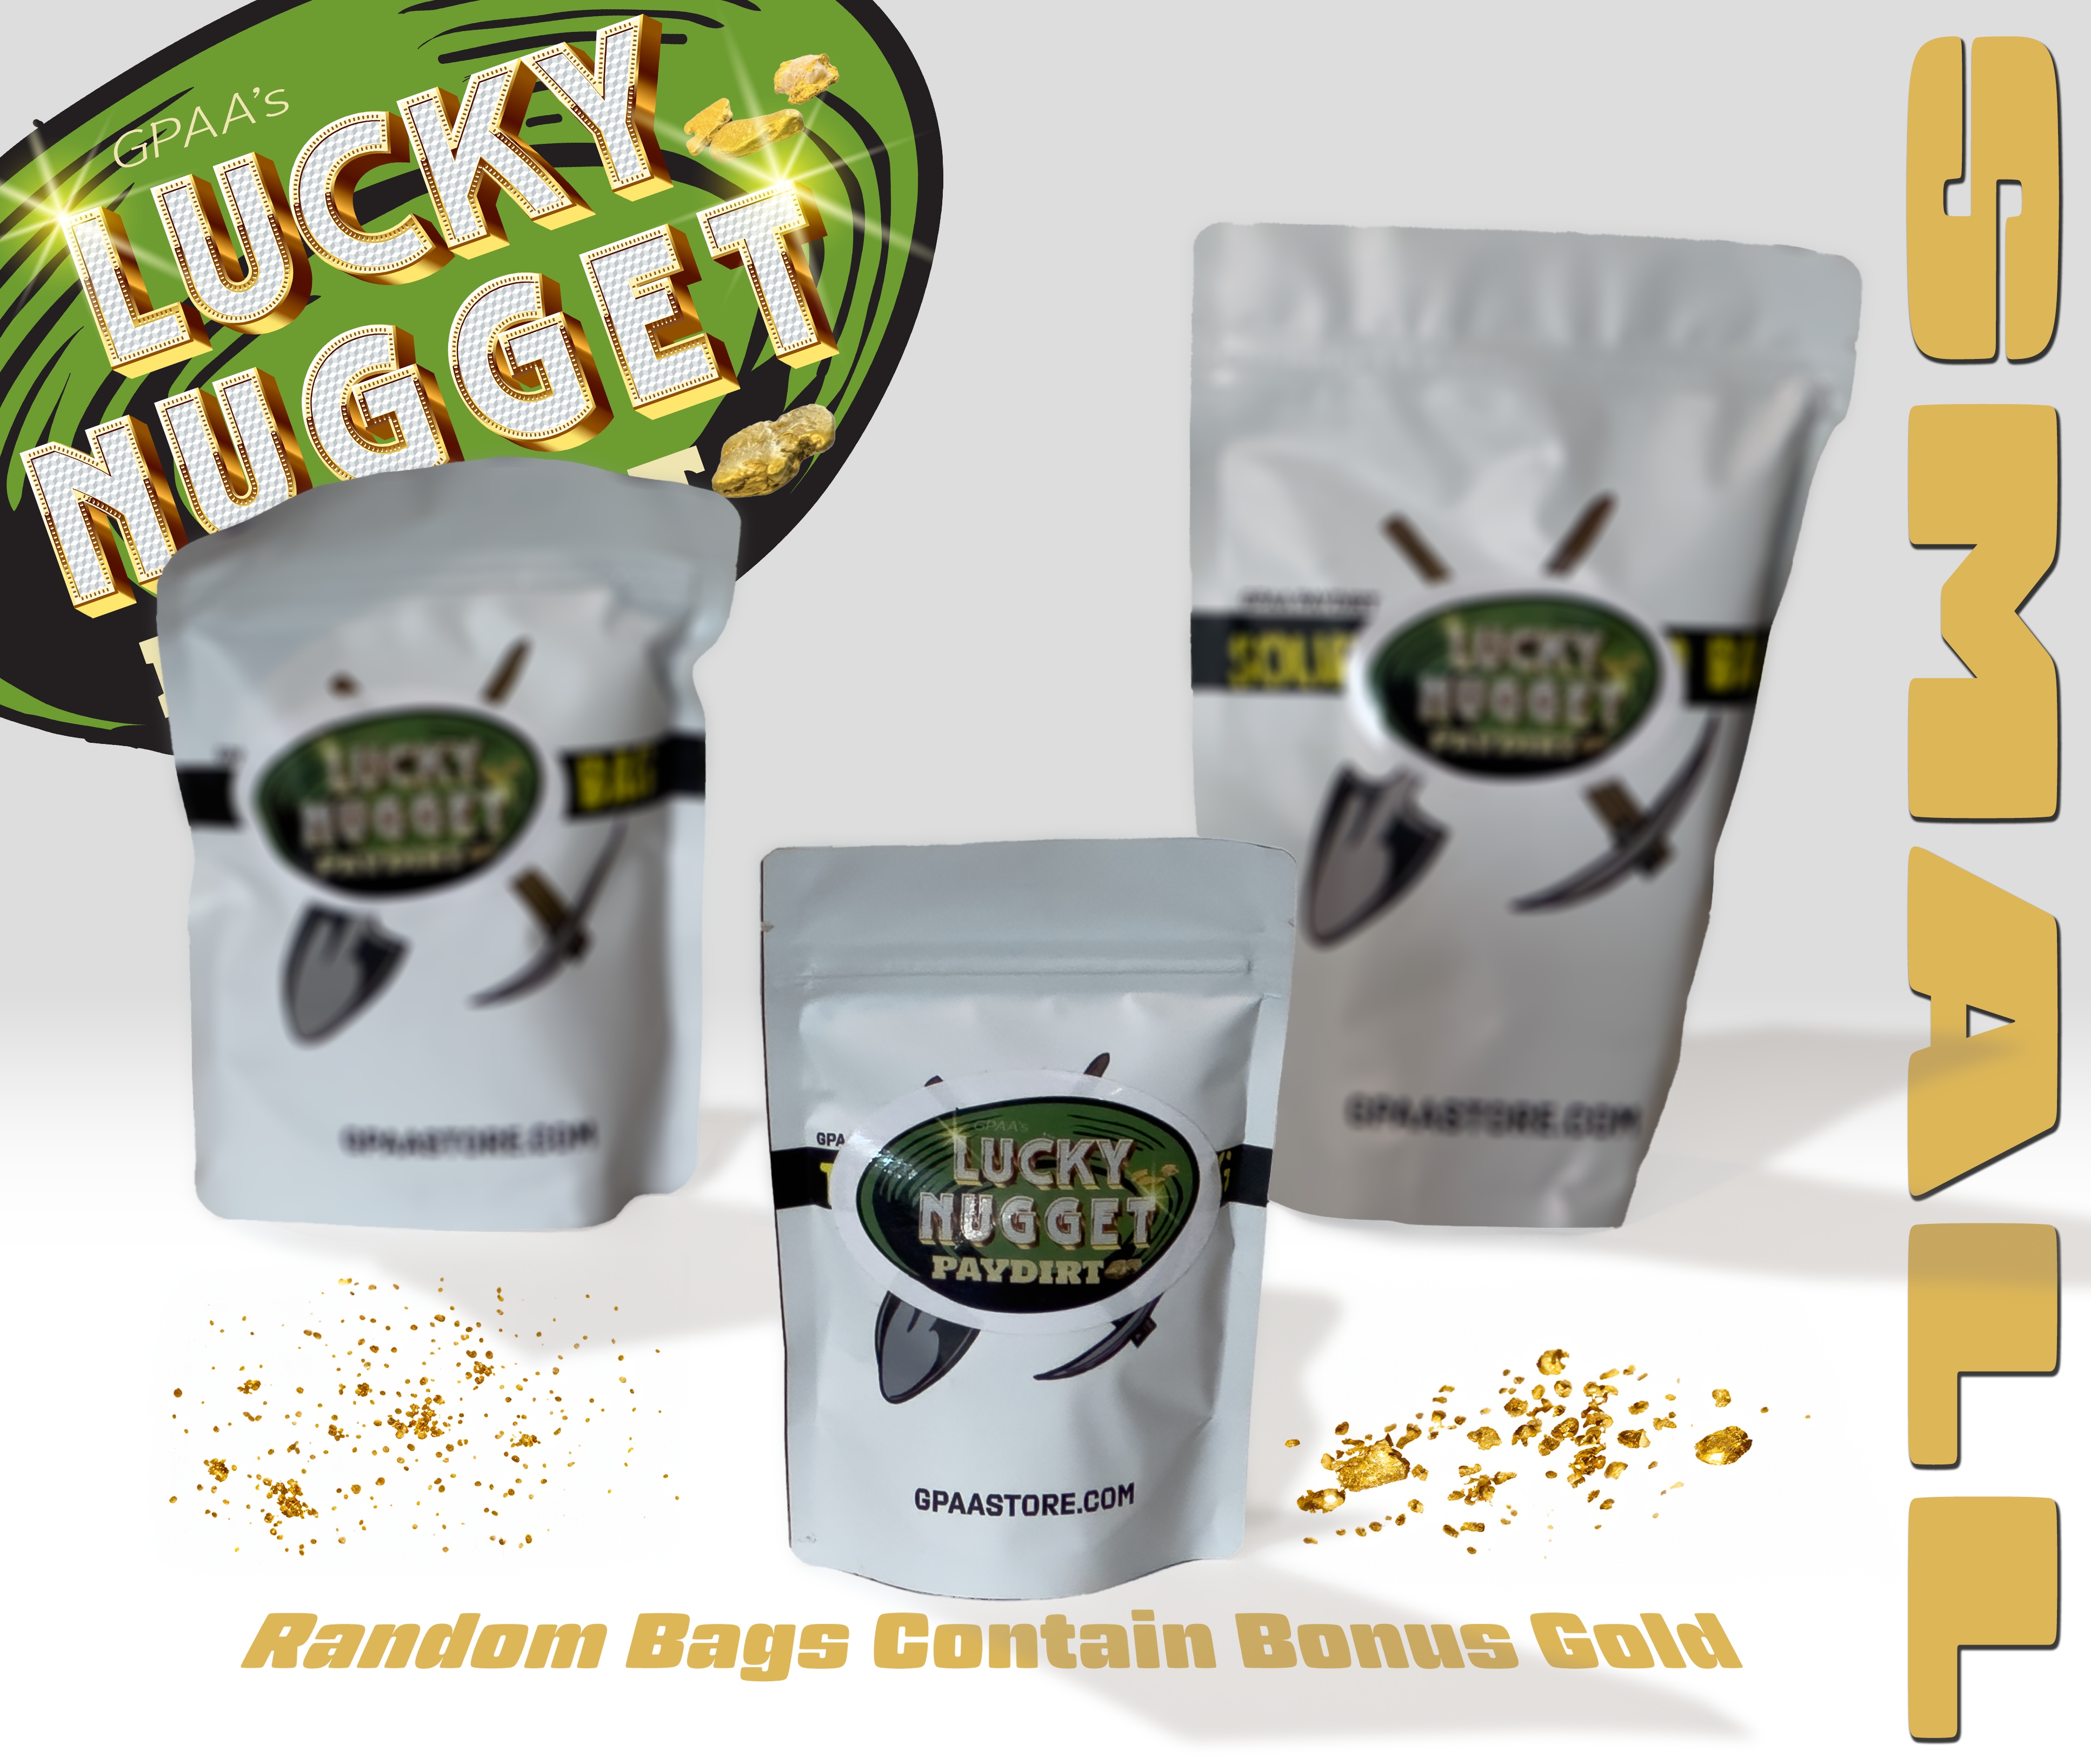 GPAA's Lucky Nugget Paydirt Subscription - Gold Prospectors Association of America